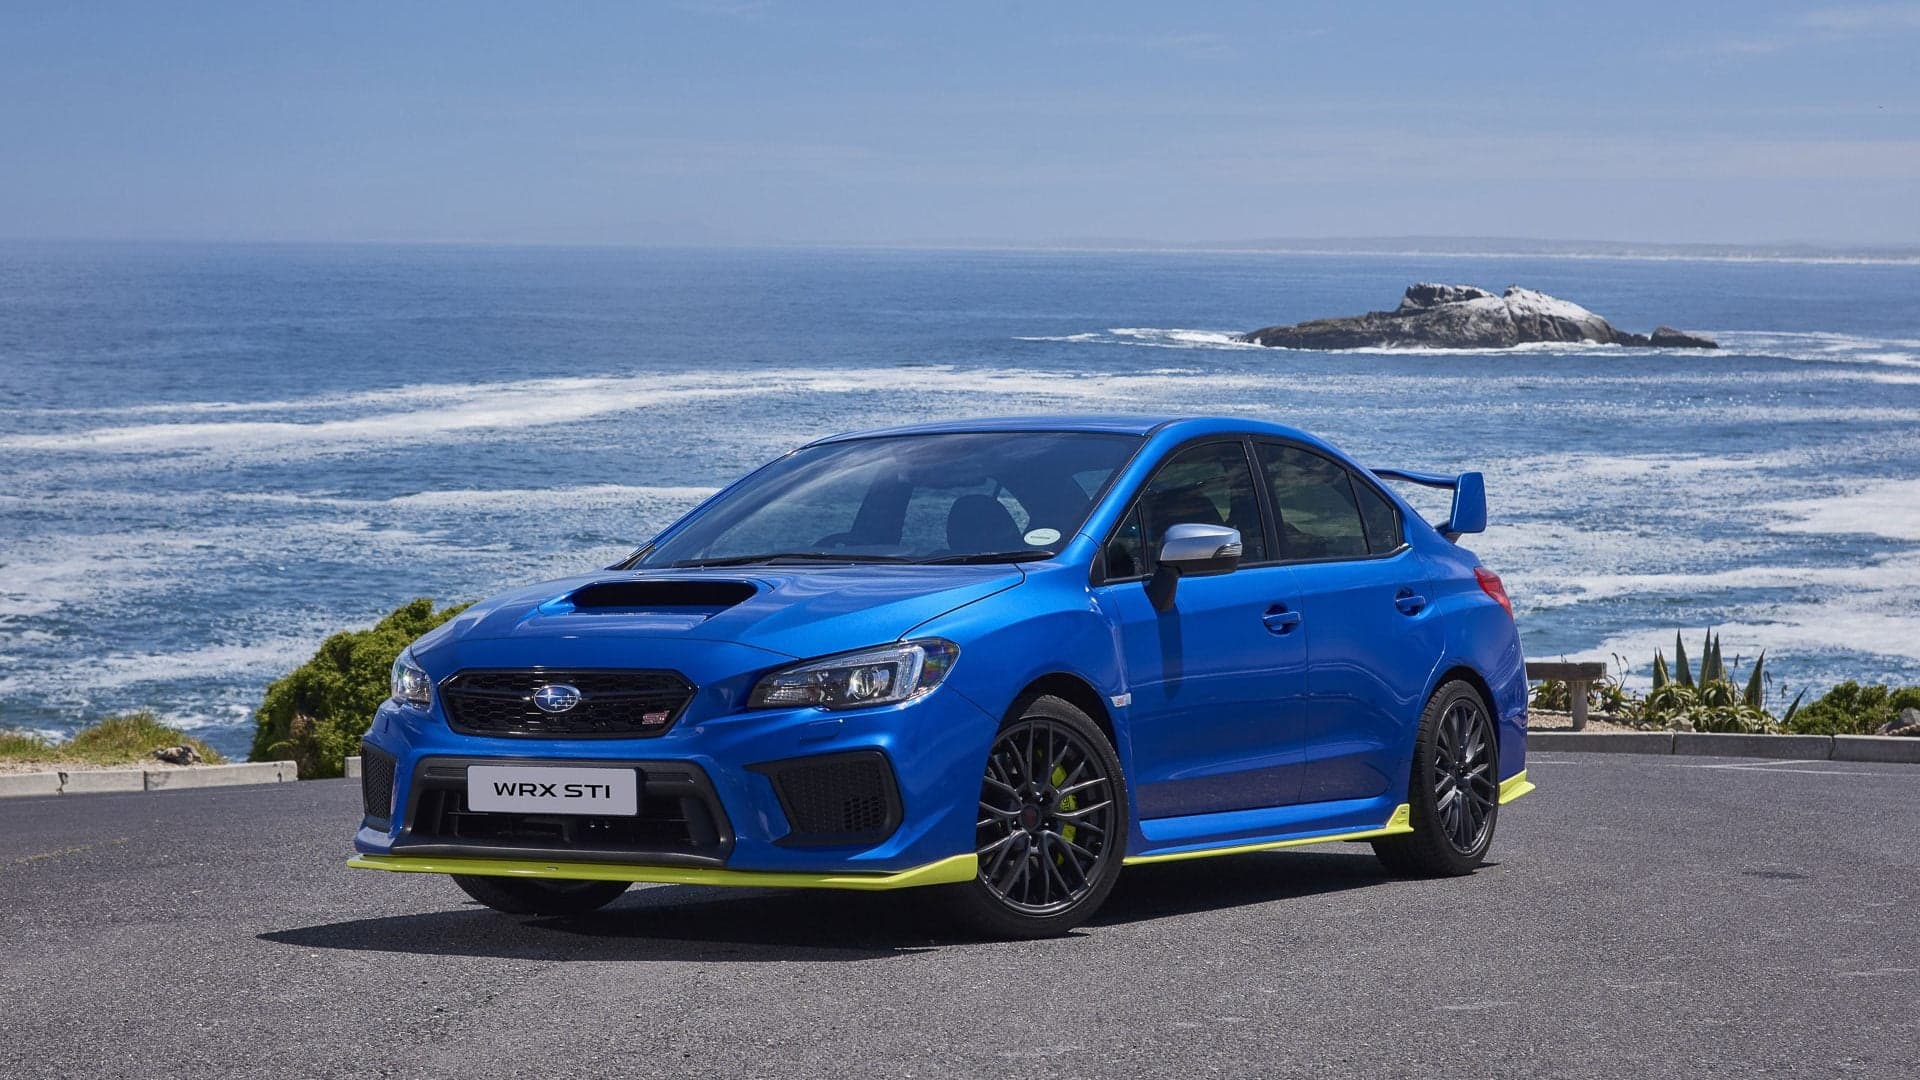 Subaru WRX STI Diamond Edition Is the Most Powerful Variant to Date and You Can’t Have It